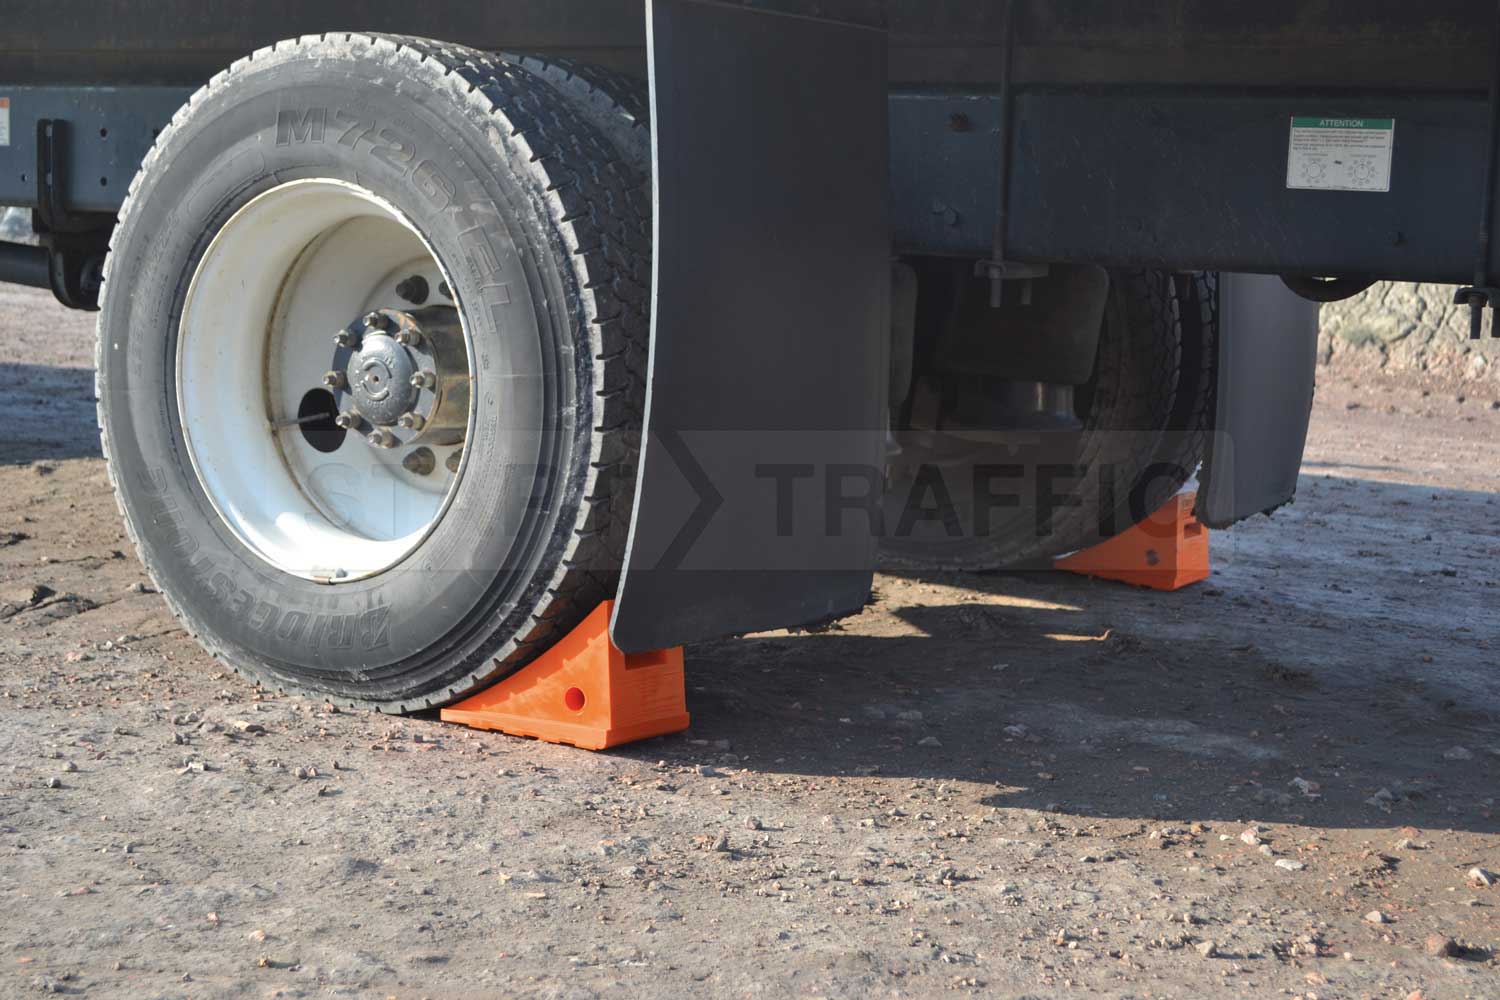 UC1500 Wheel Chock being used with Quarry vehicele